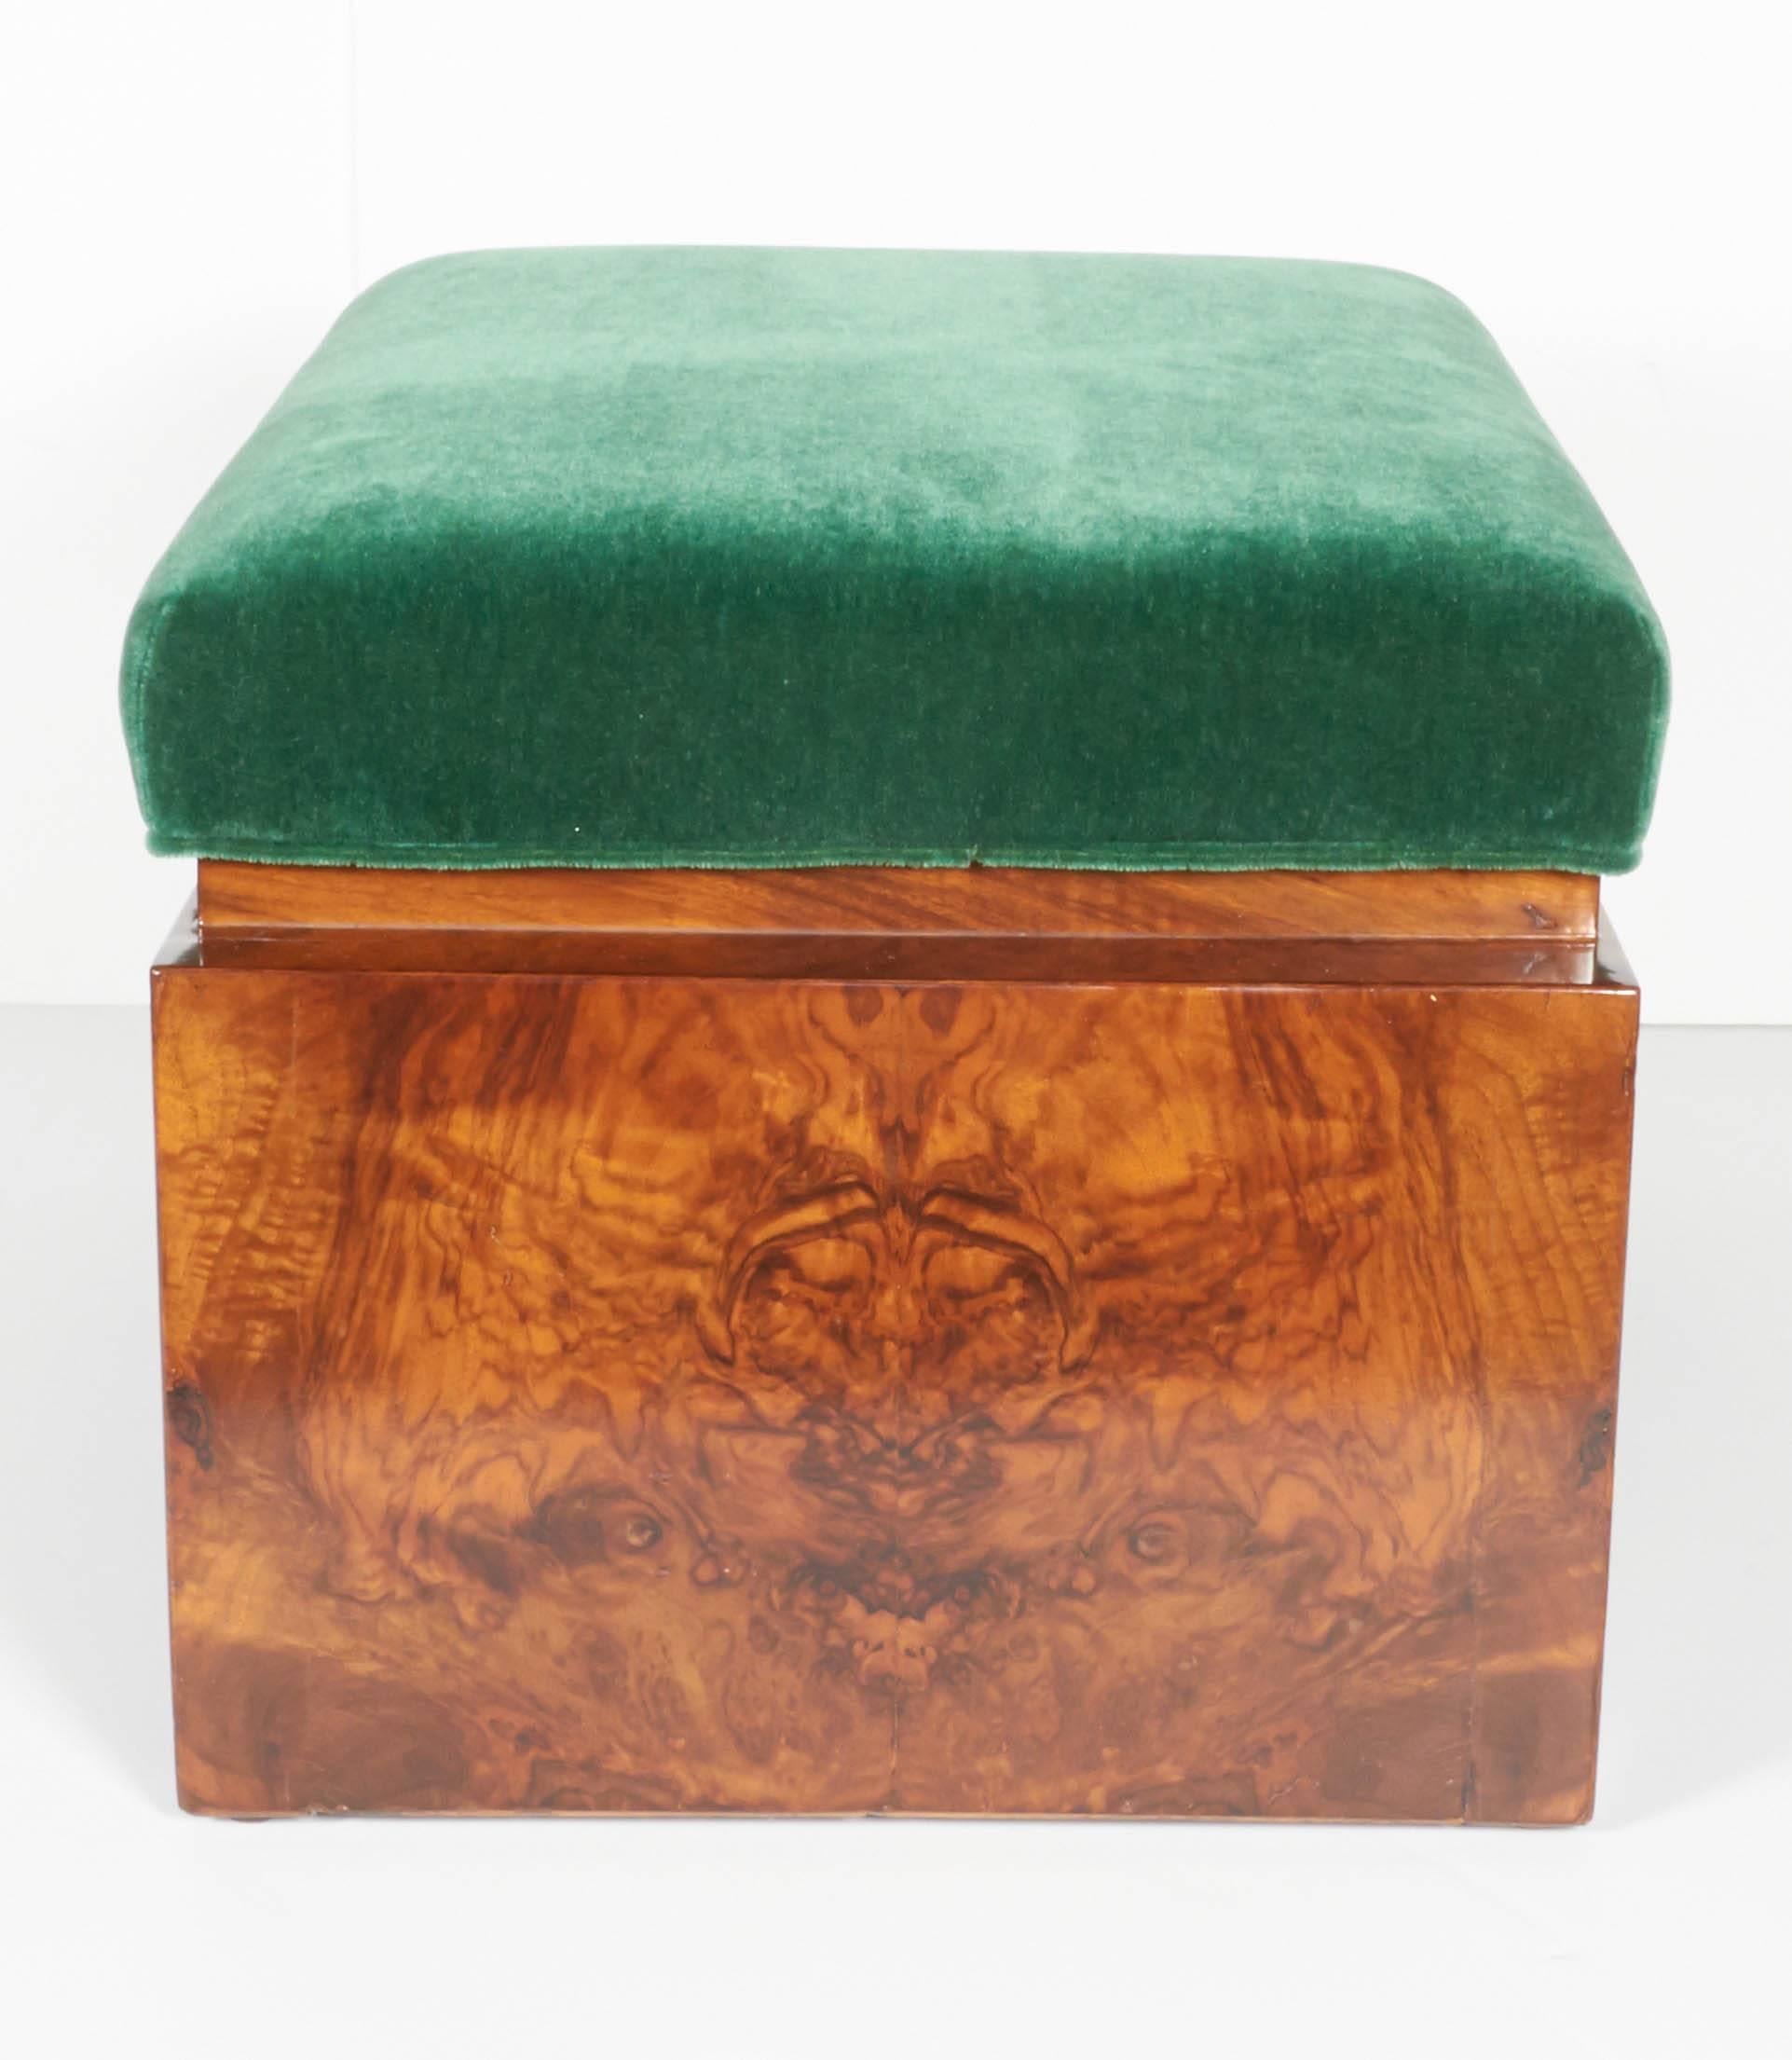 Hand-Crafted Rare Art Deco Low Benches in Emerald Mohair and Burled Carpathian Elm